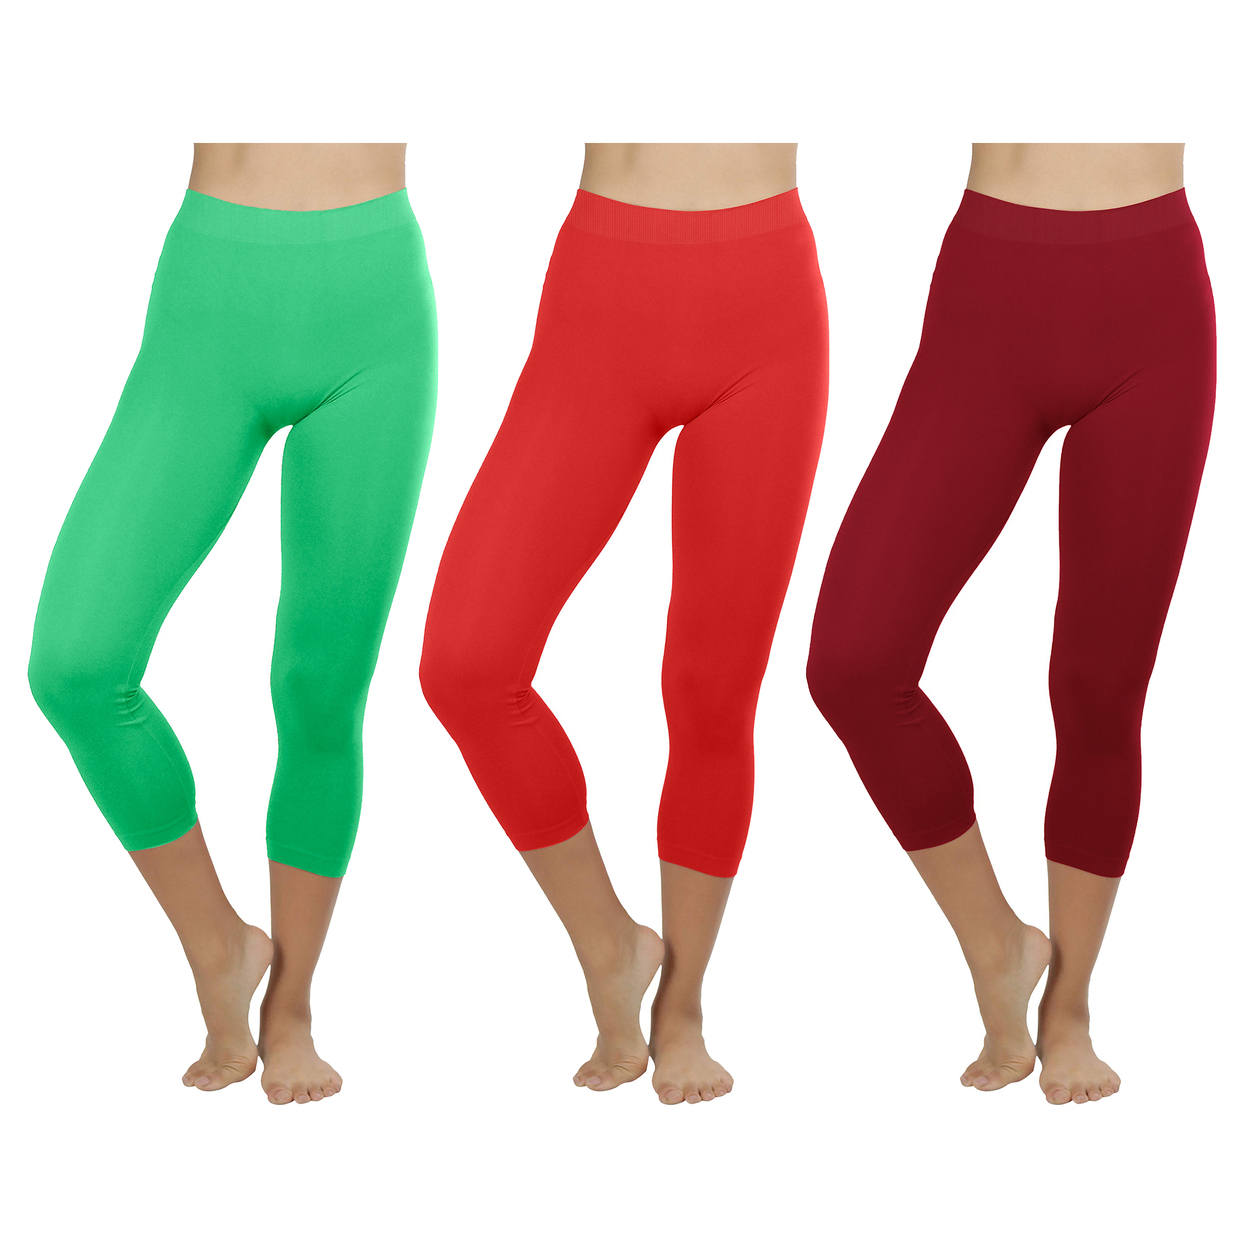 2-Pack: Women's Ultra-Soft High Waisted Smooth Stretch Active Yoga Capri Leggings - Green &red, Small